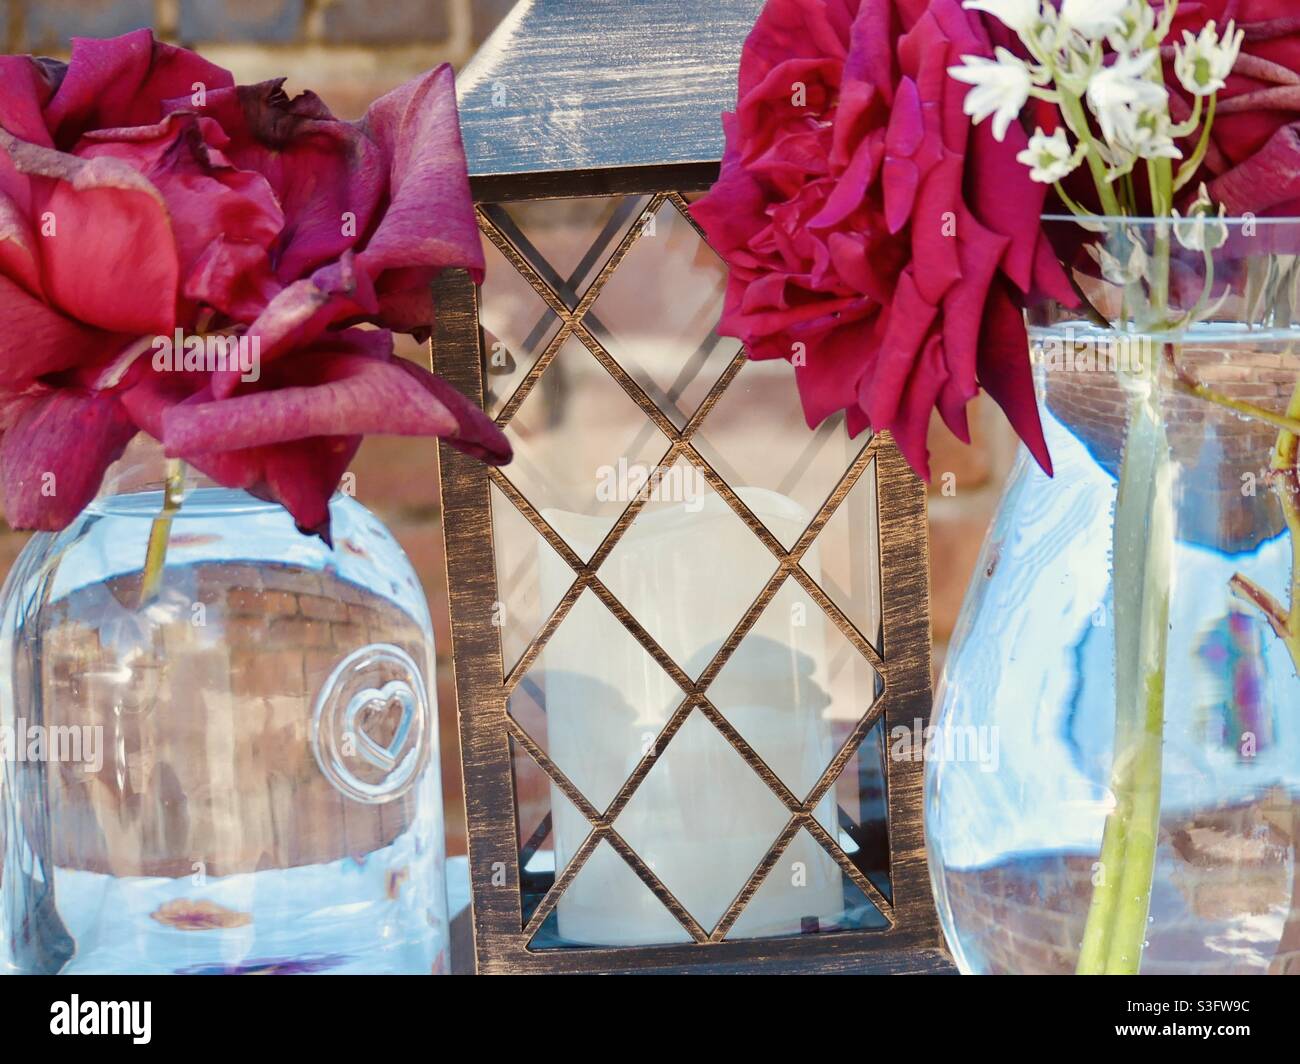 Garden party with flowers and a lantern Stock Photo